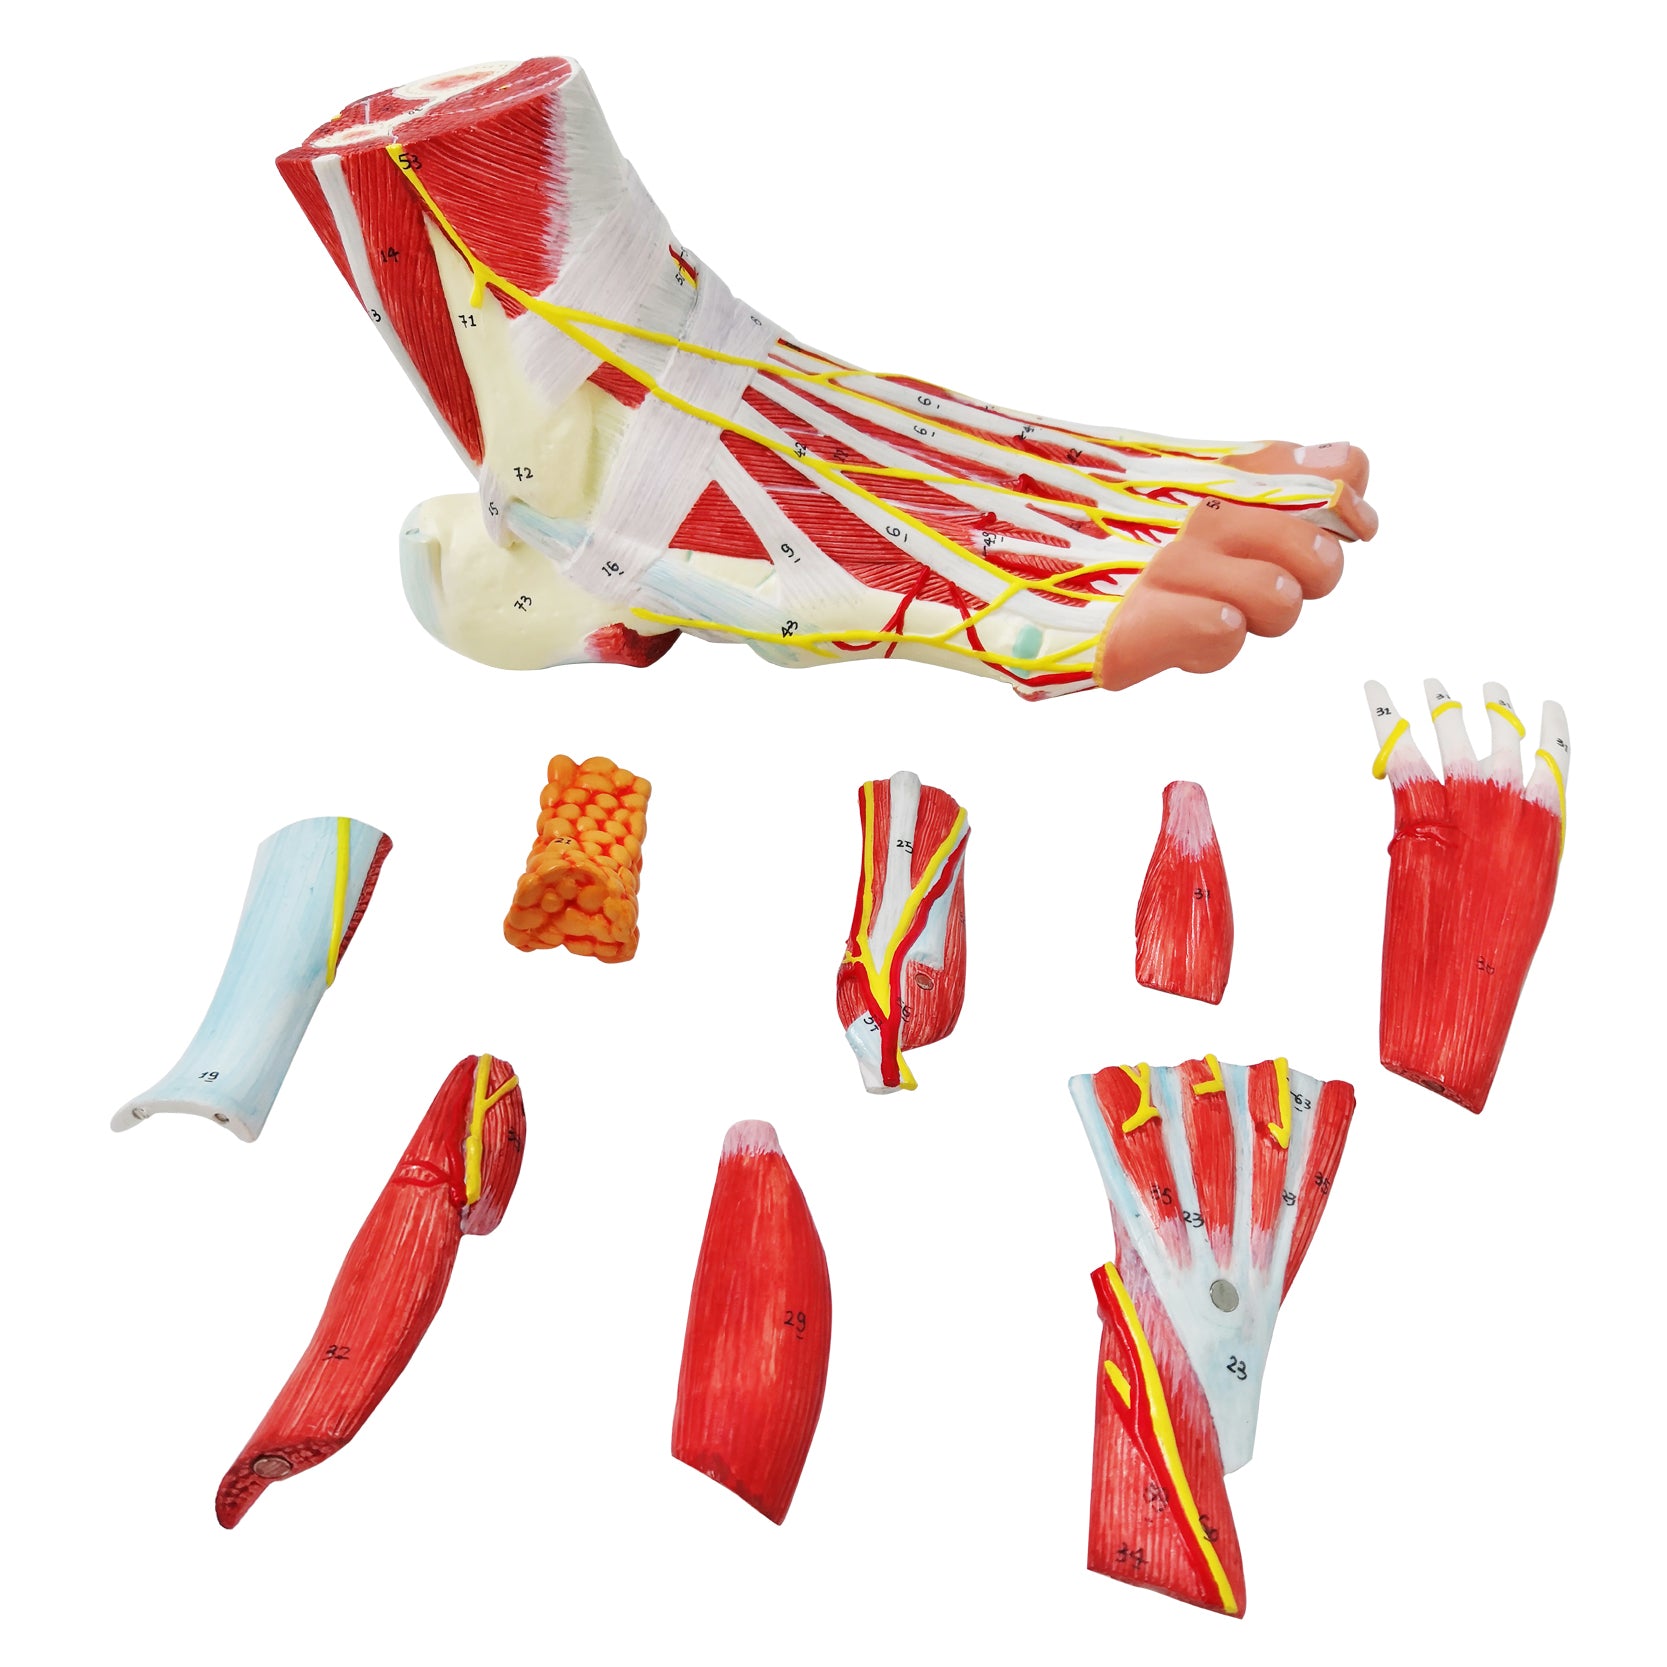 Evotech Scientific Life Size Numbered Foot Anatomical Skeleton Model with Bones Muscles Ligaments Nerves and Blood Vessels